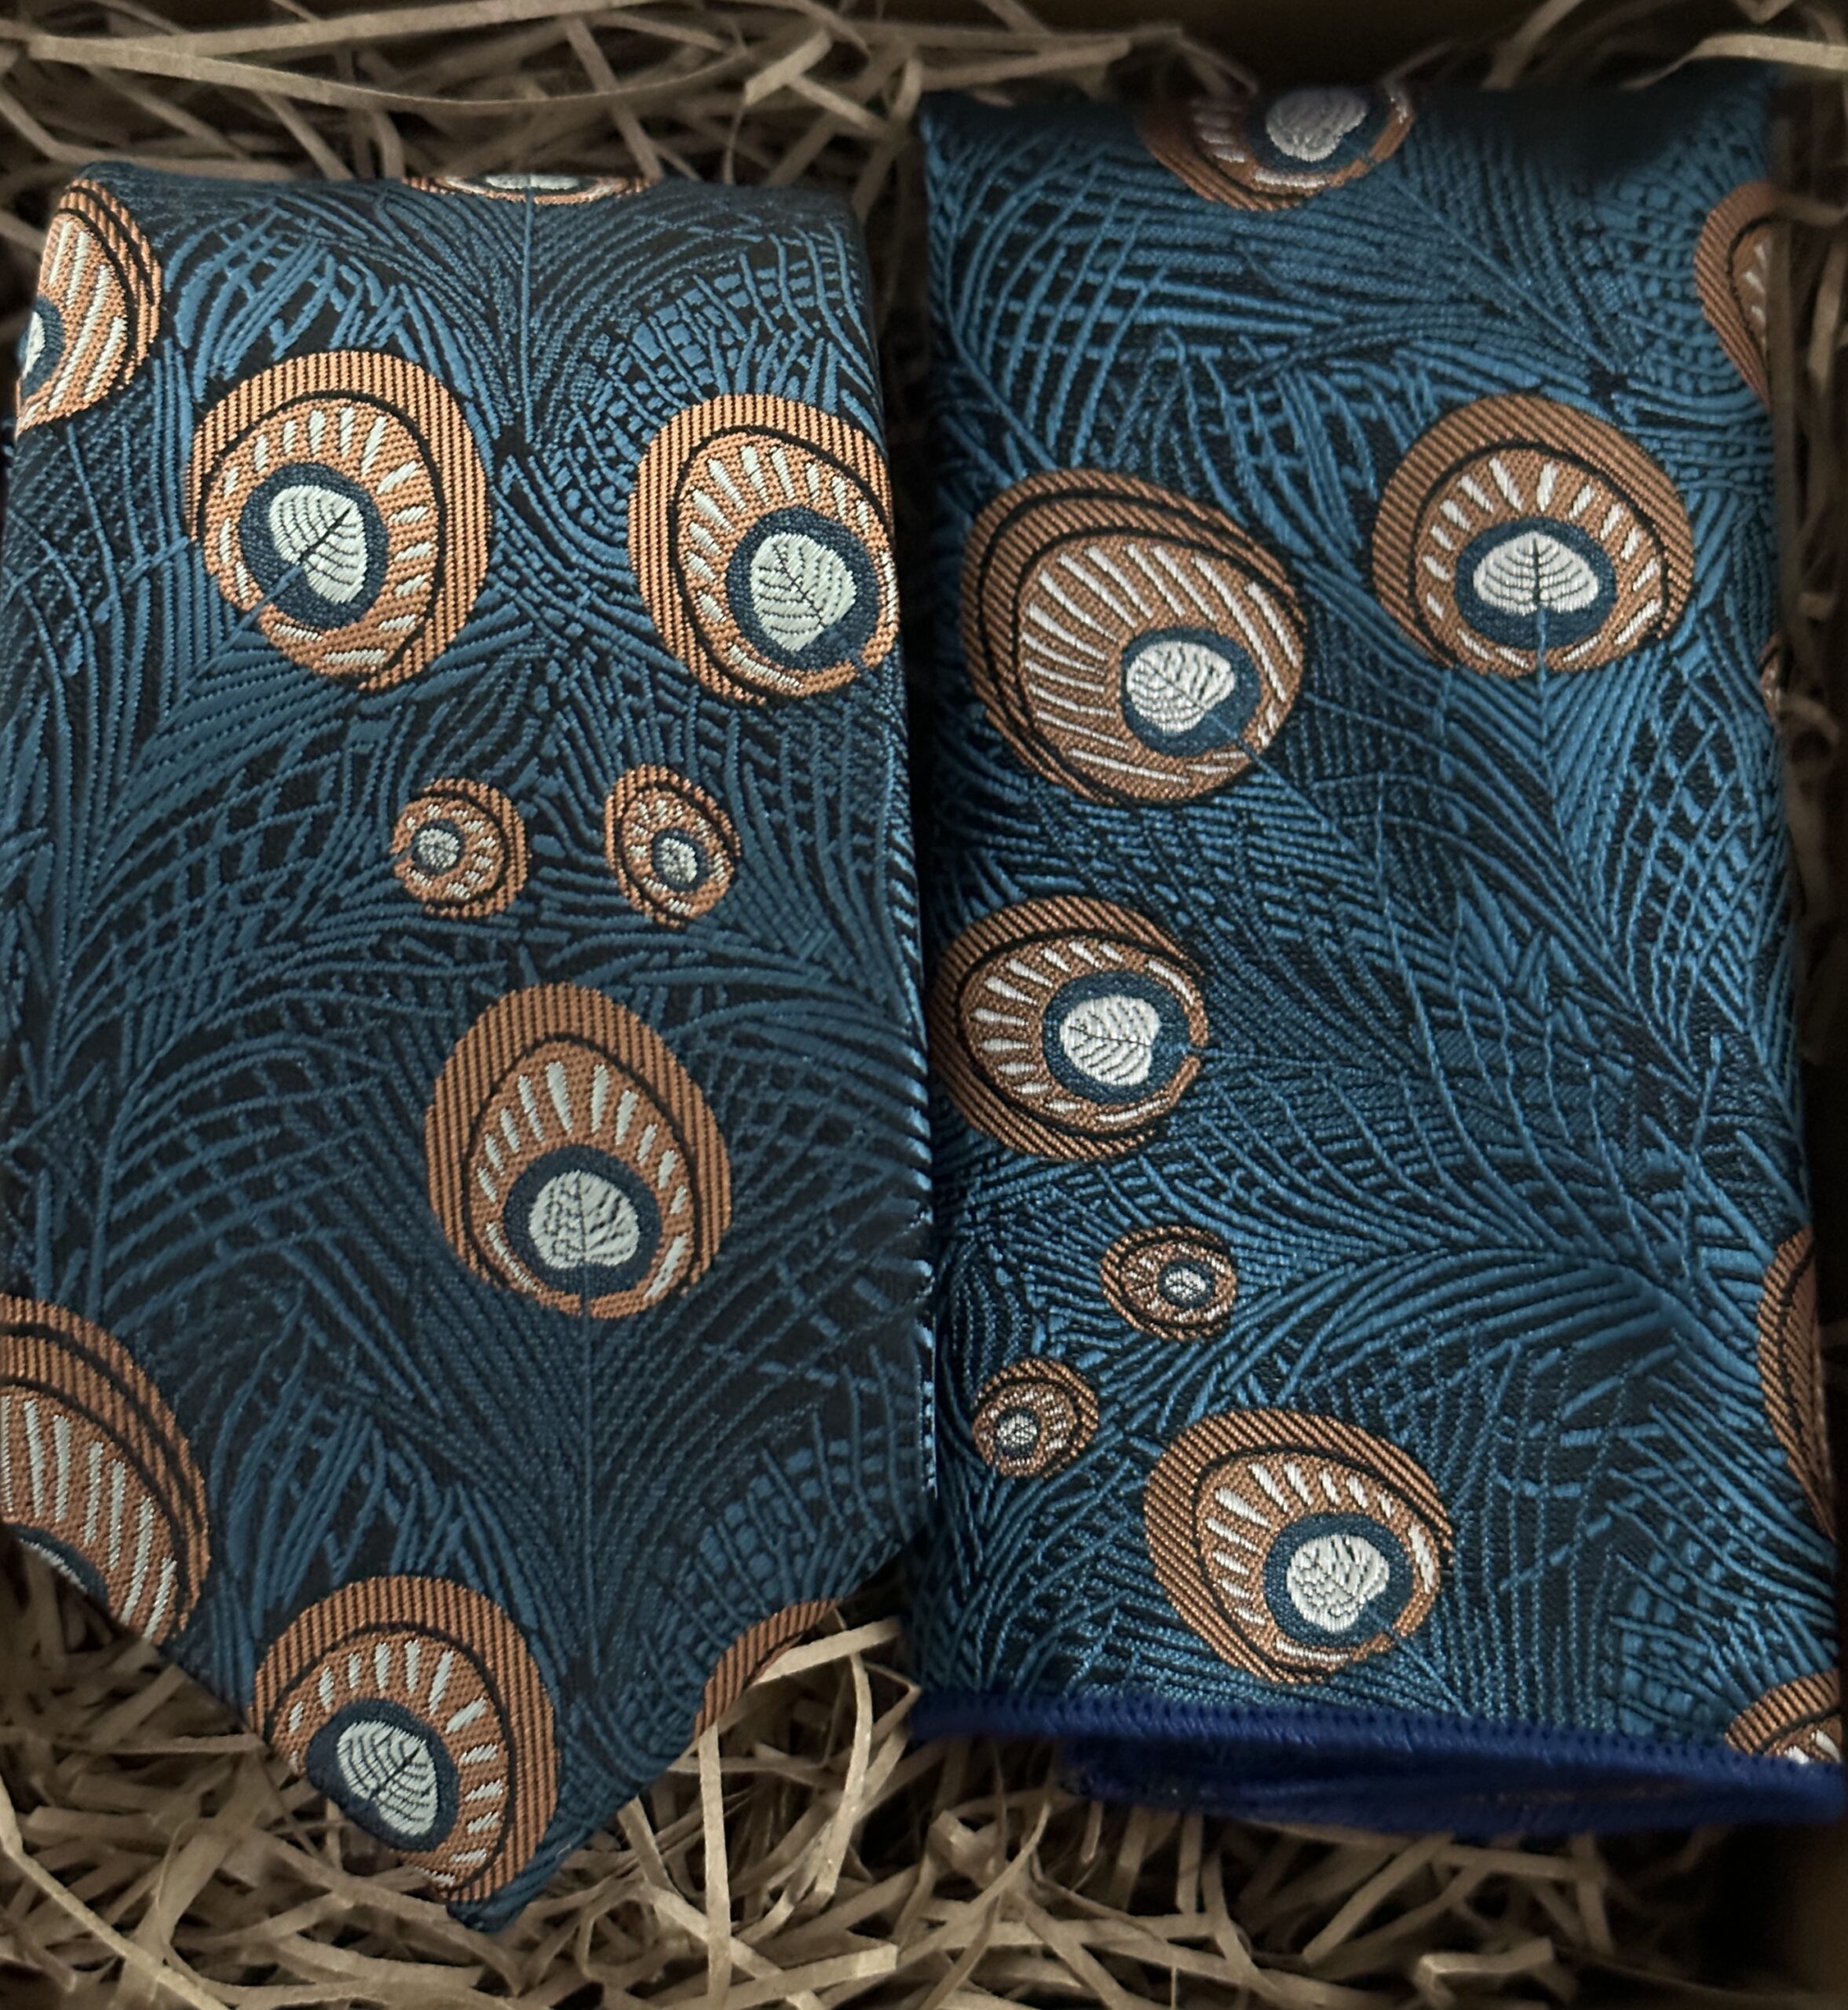 A photo of a peacock necktie and pocket square in a blue shade with gold feather plumes